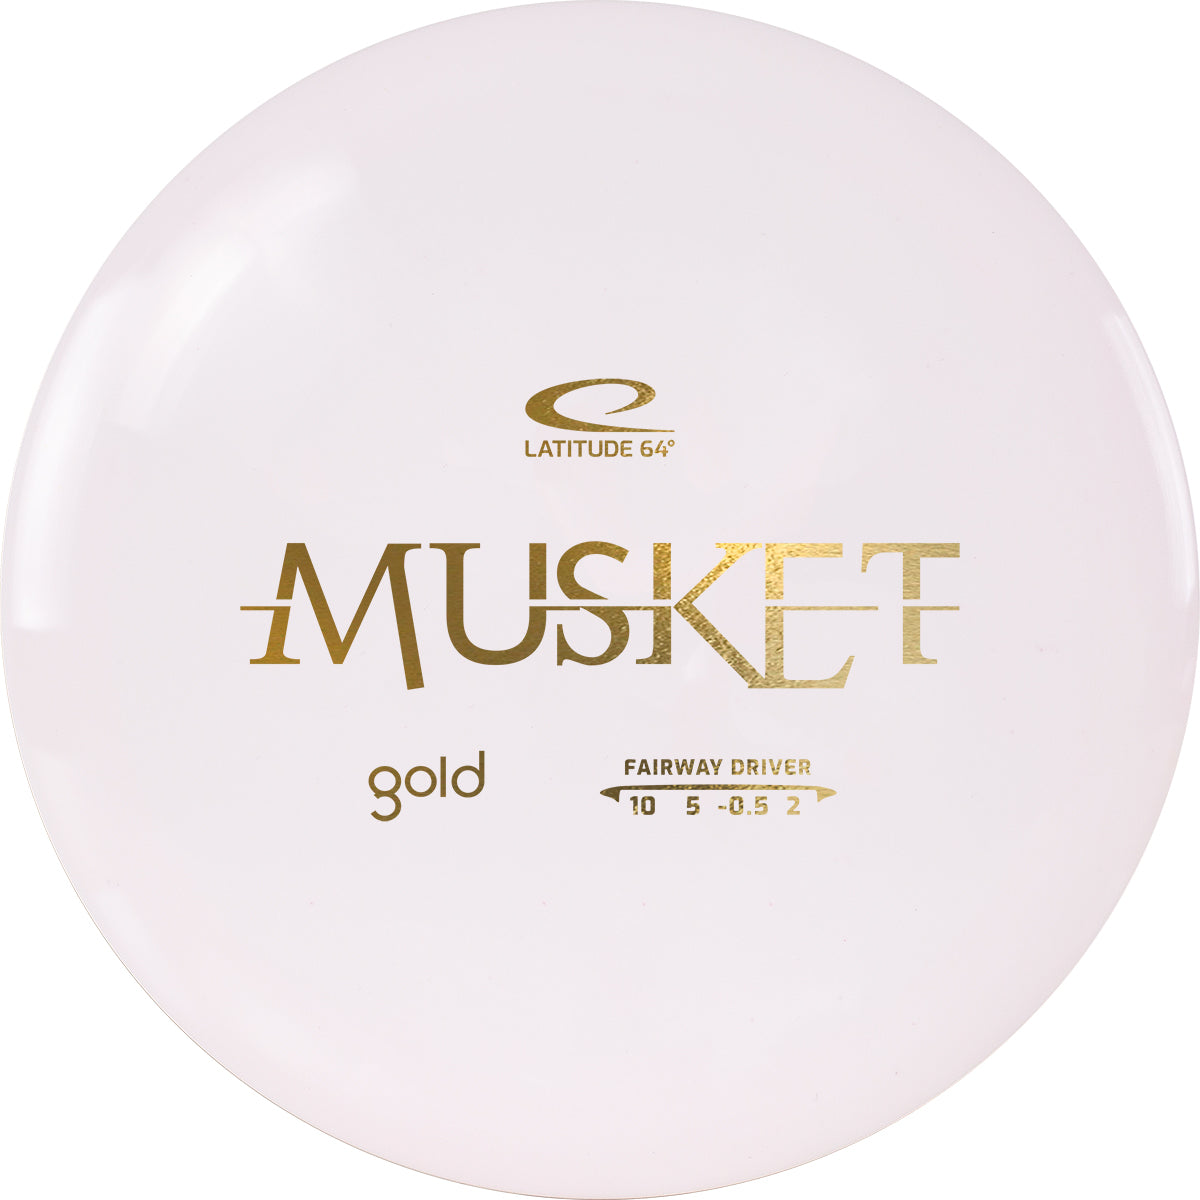 Gold Musket (6906682605633)